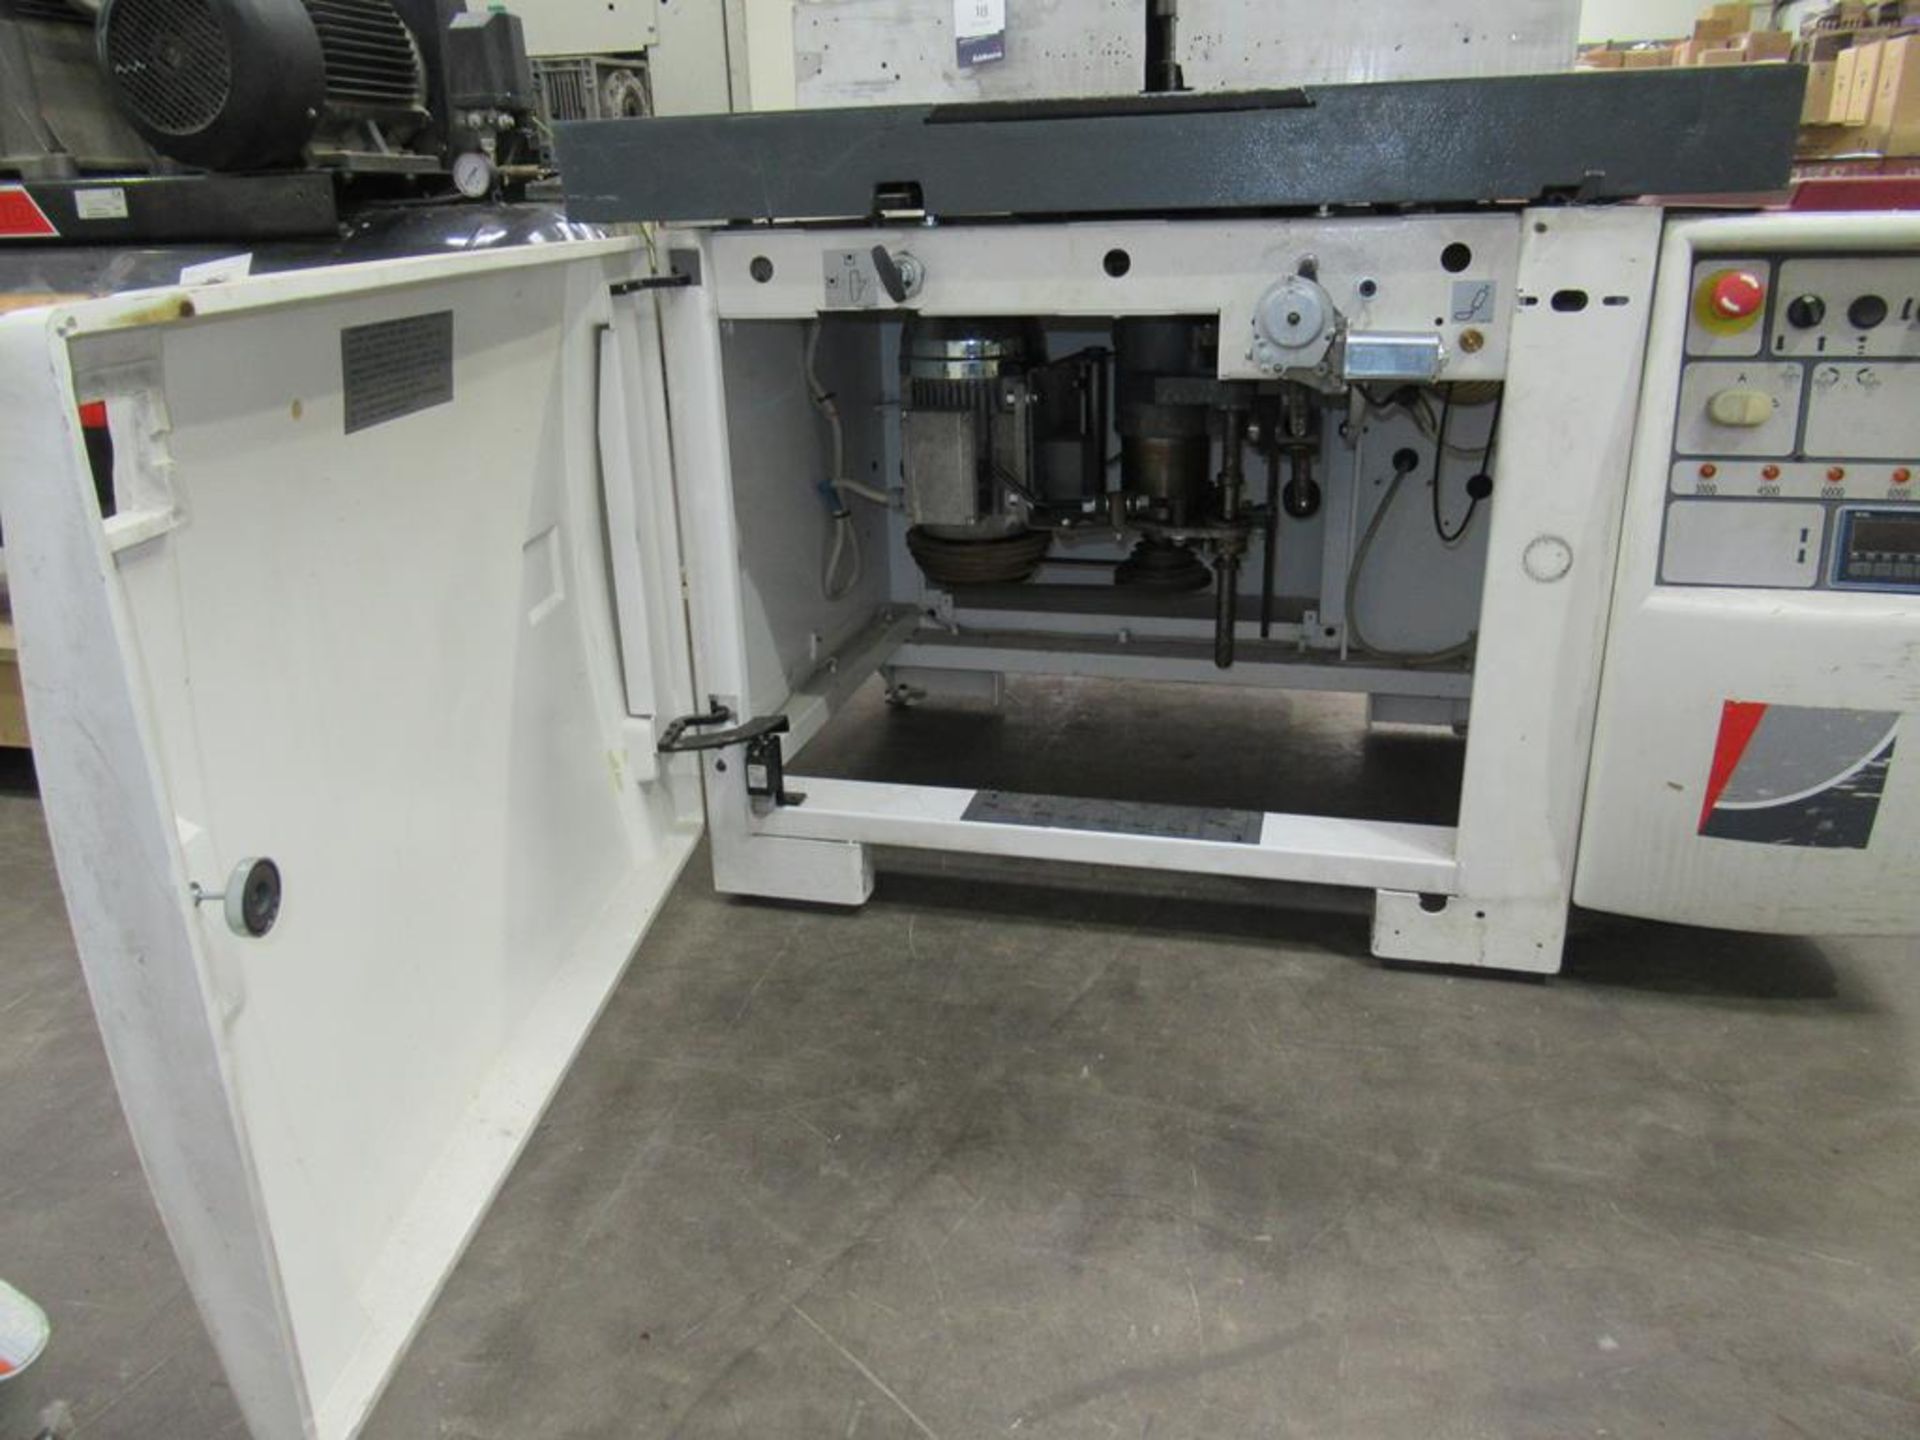 Paoloni Tx160 Tilting Spindle Moulder - Image 5 of 14